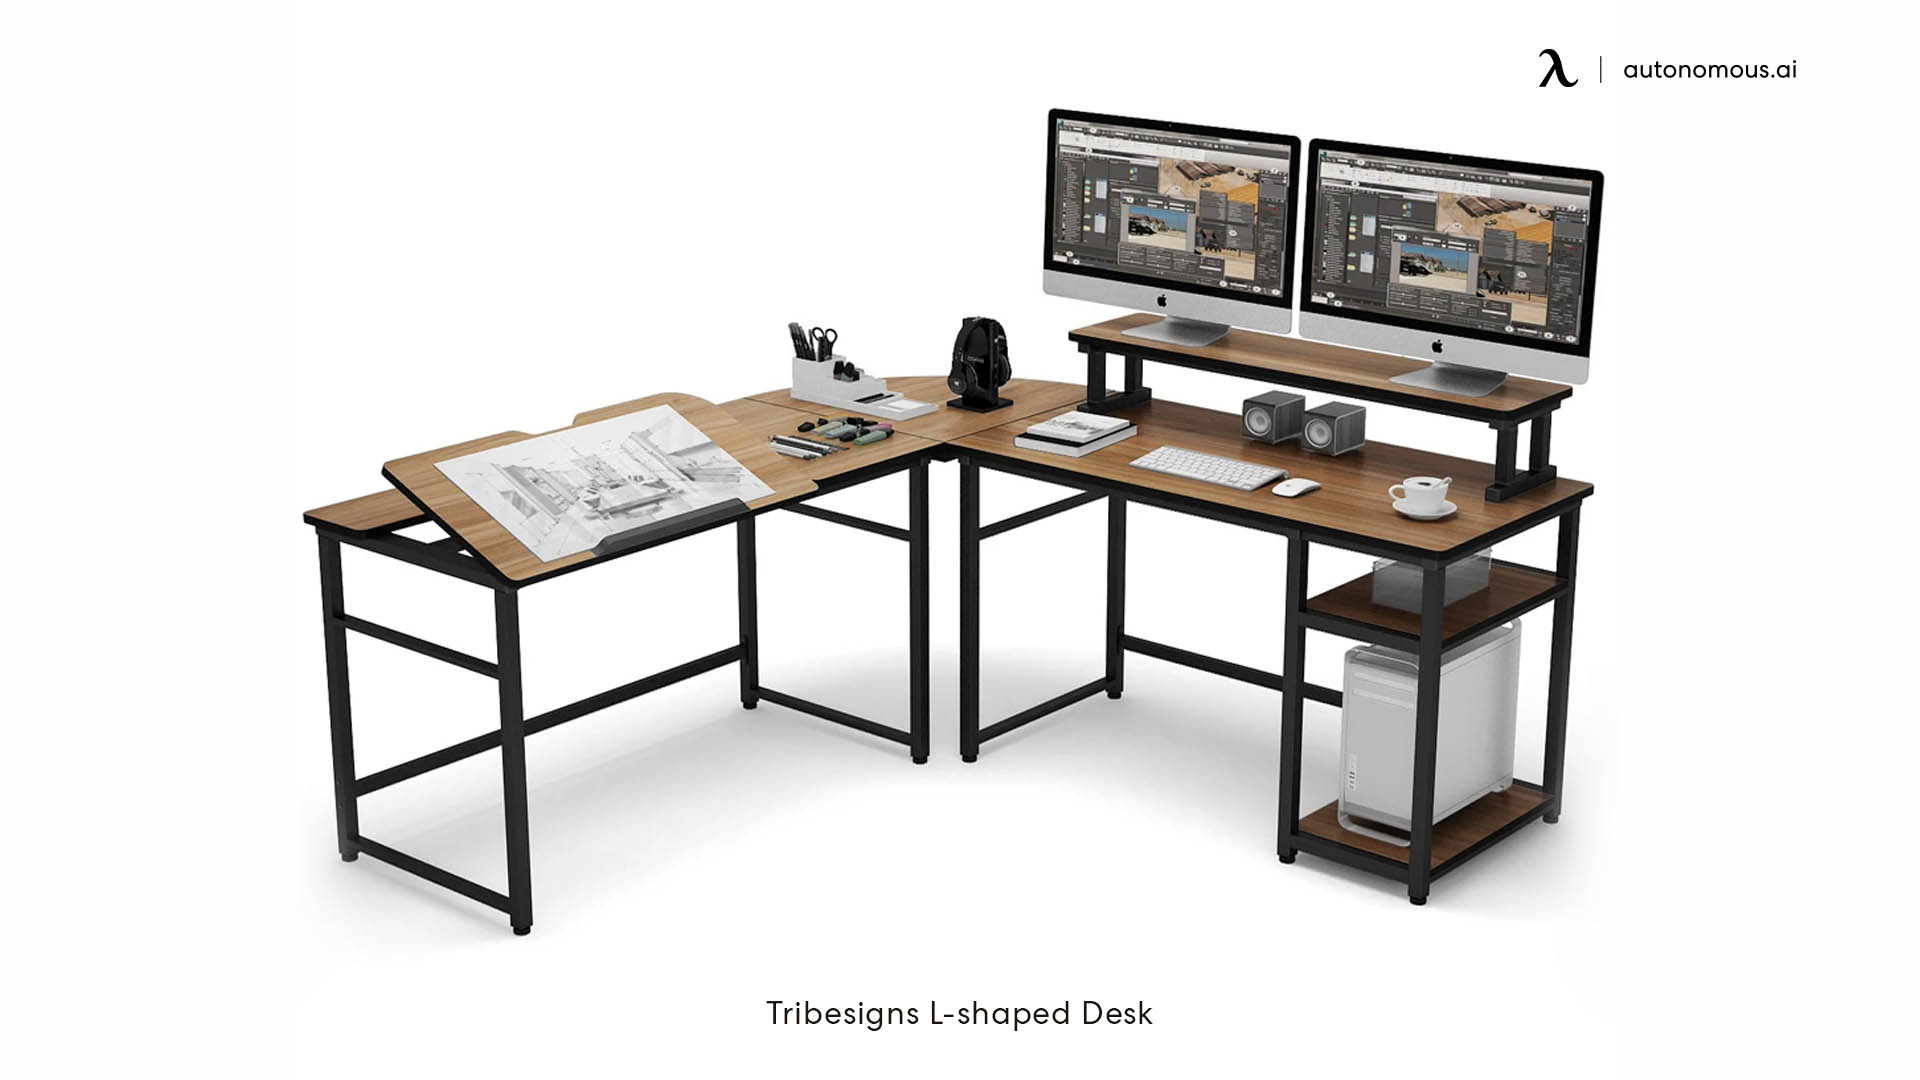 Tribesigns L-shaped desk for multiple computers